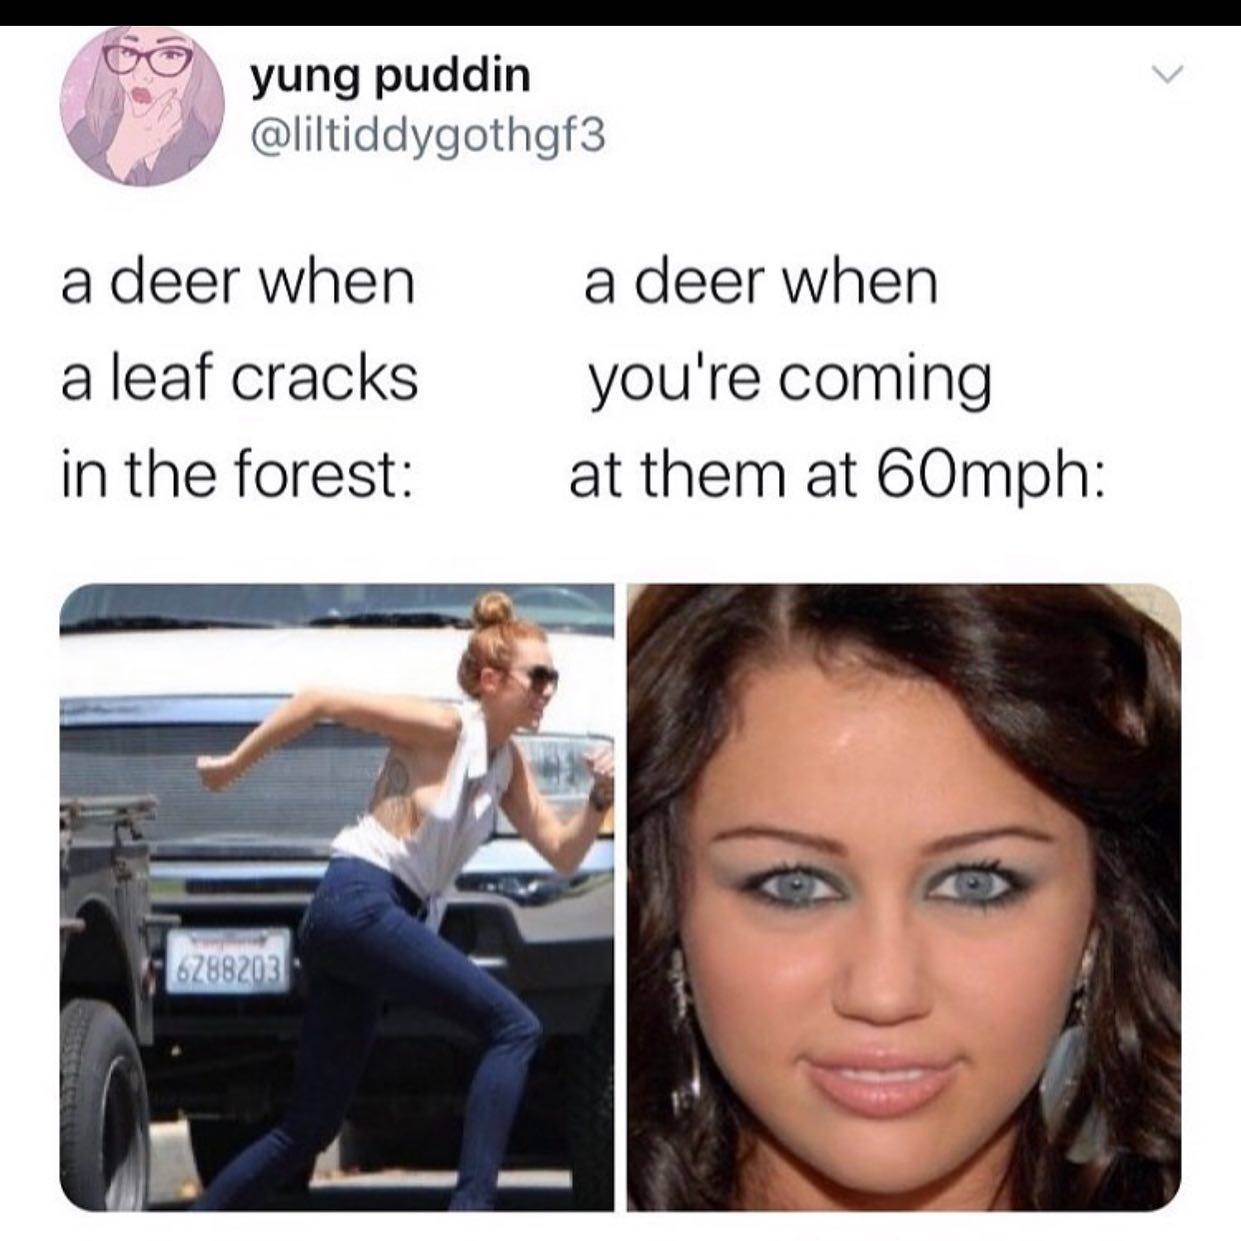 dank memes - miley cyrus - yung puddin a deer when a leaf cracks in the forest a deer when you're coming at them at 60mph | 6288203